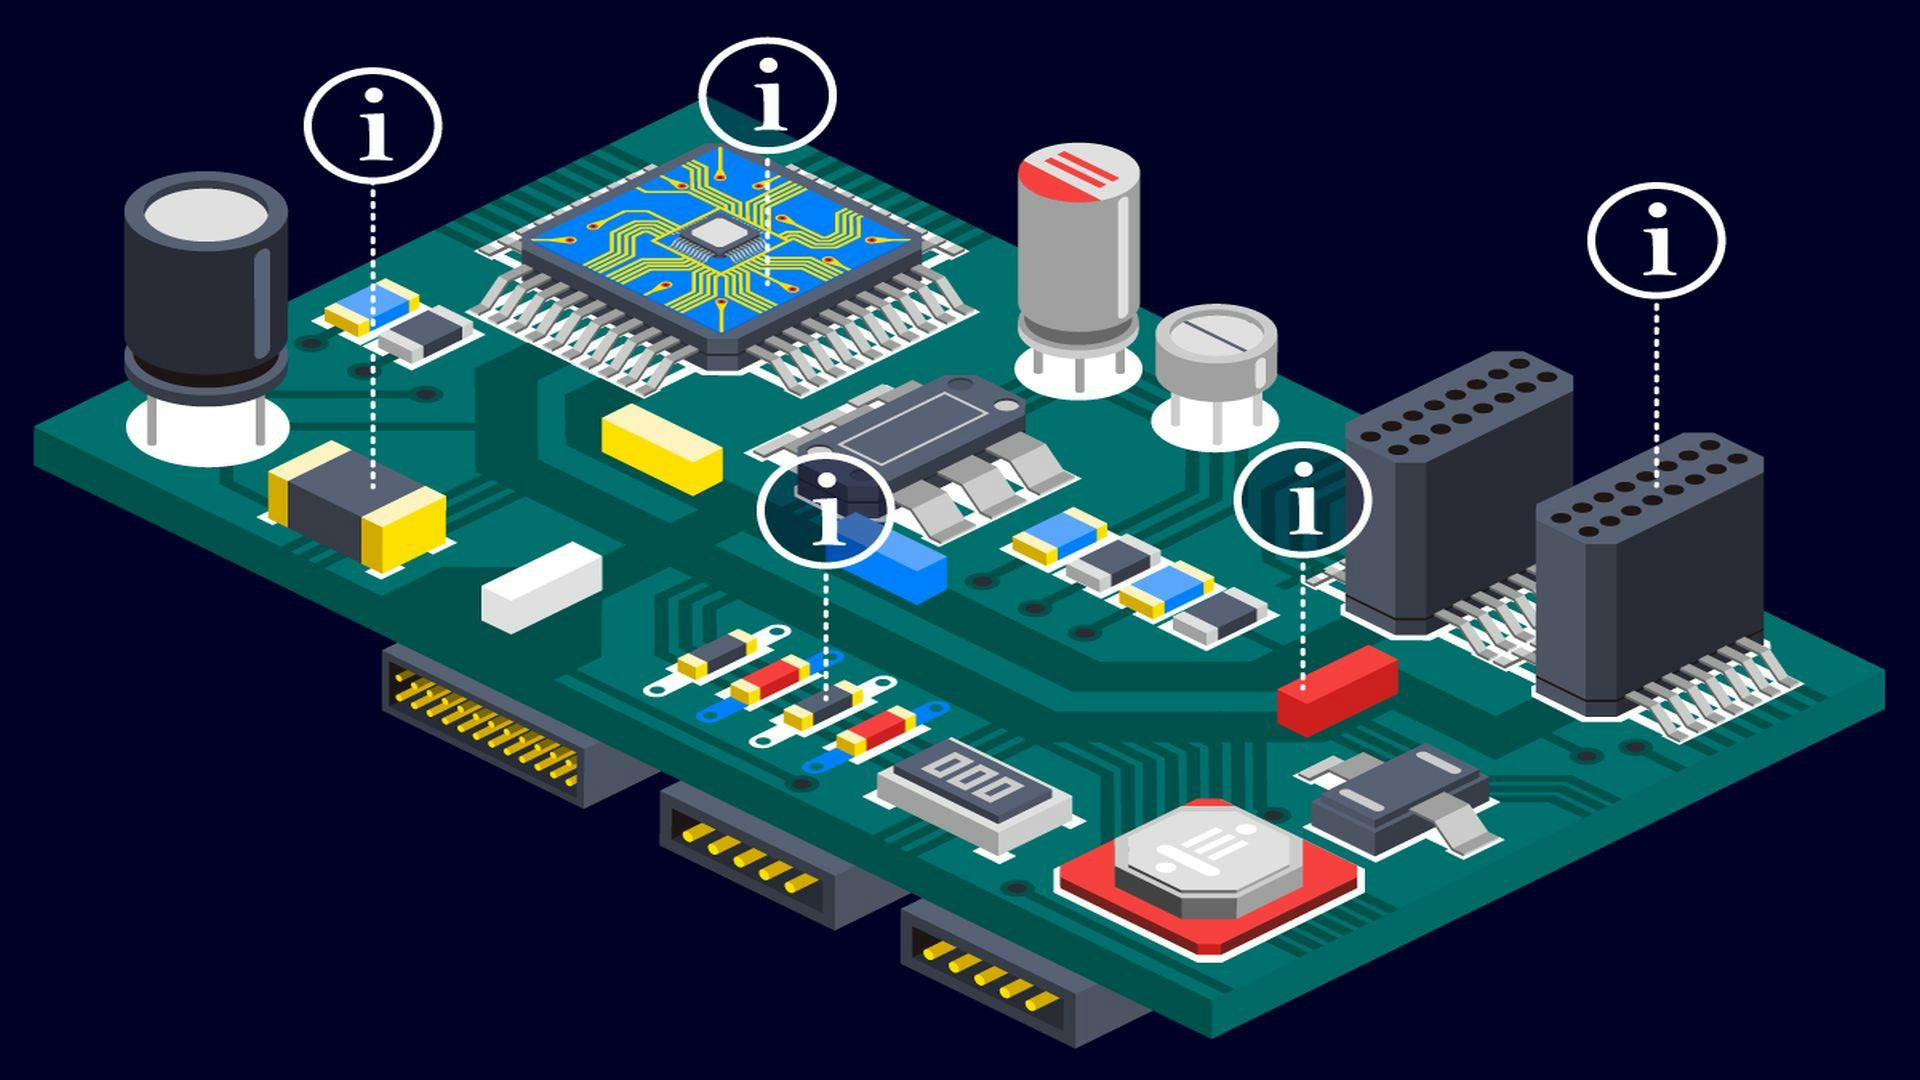 Image of a PCB board with information icons hovering over parts of the board representing data visualization